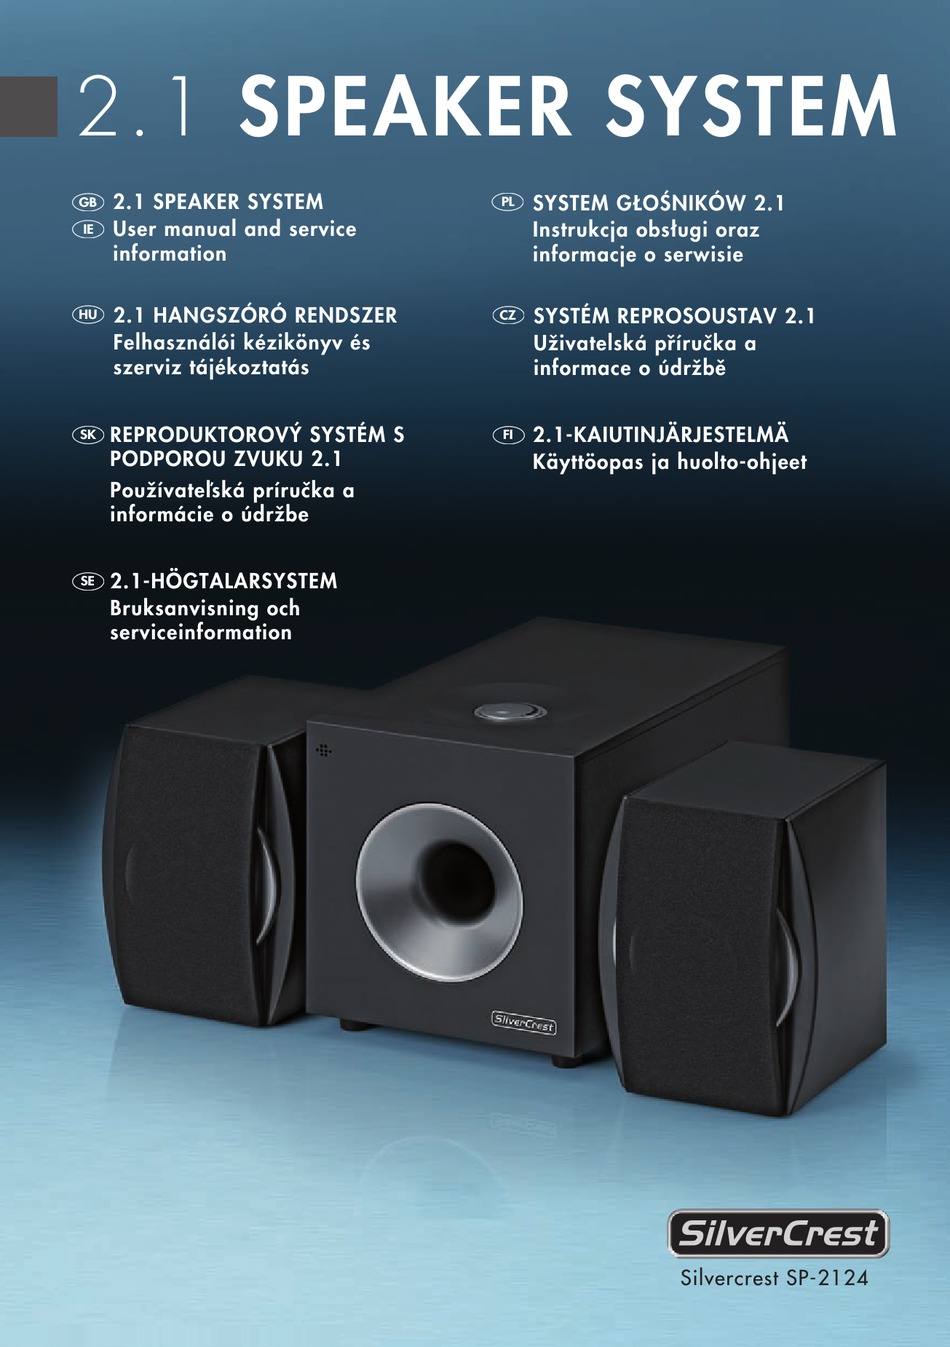 The Manual Service Information Using User | SP-2124 And ManualsLib - 7] Subwoofer Silvercrest [Page